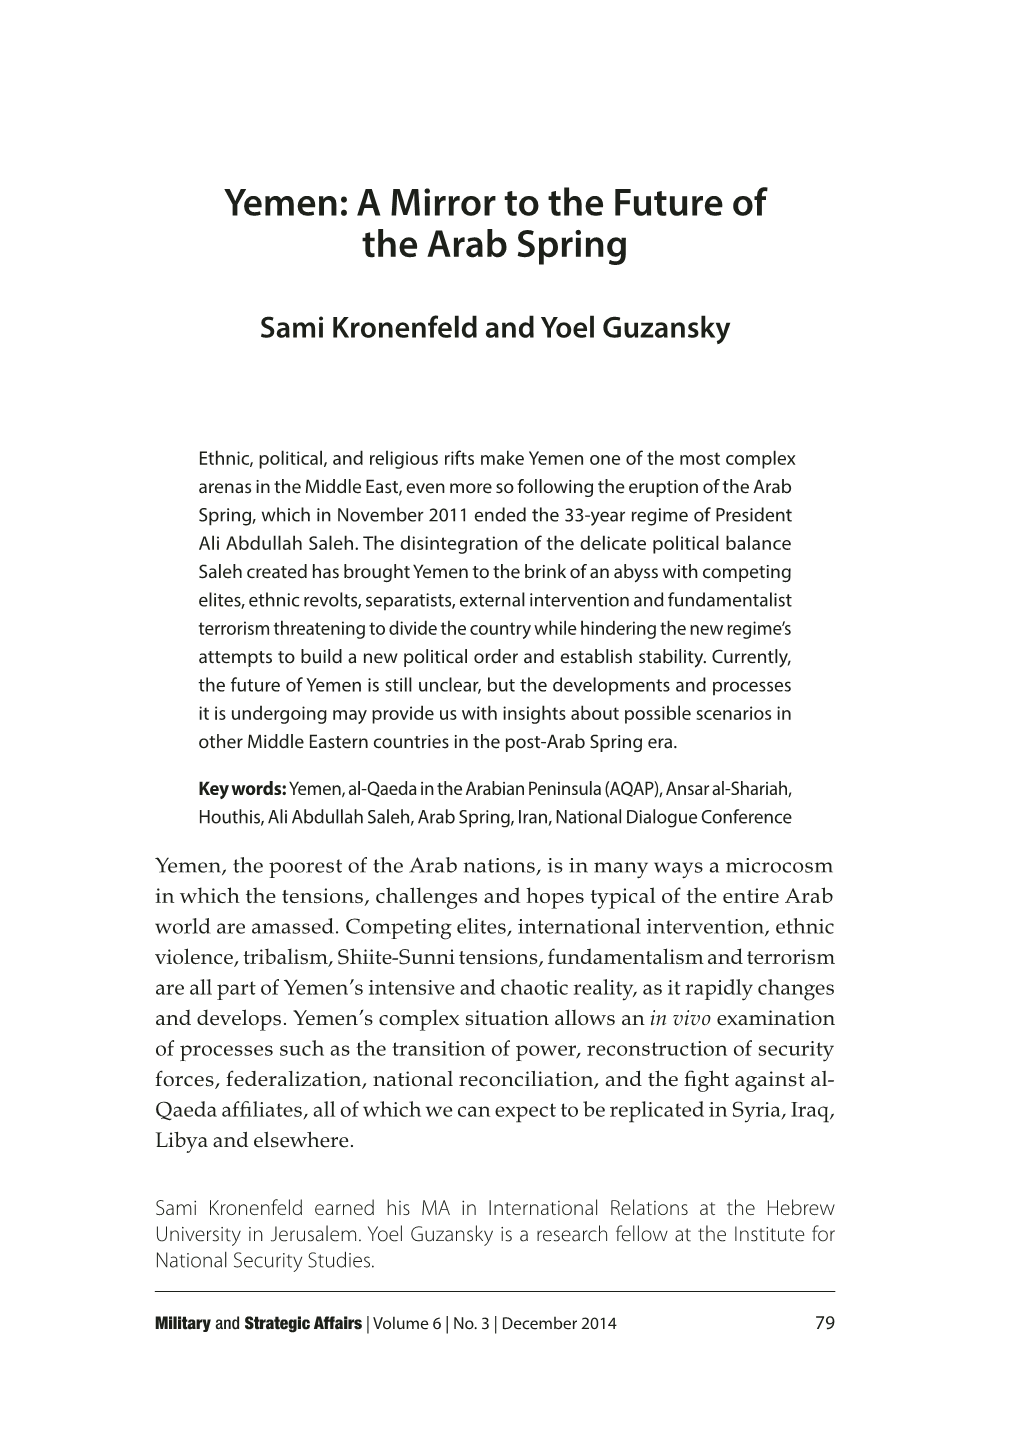 Yemen: a Mirror to the Future of the Arab Spring